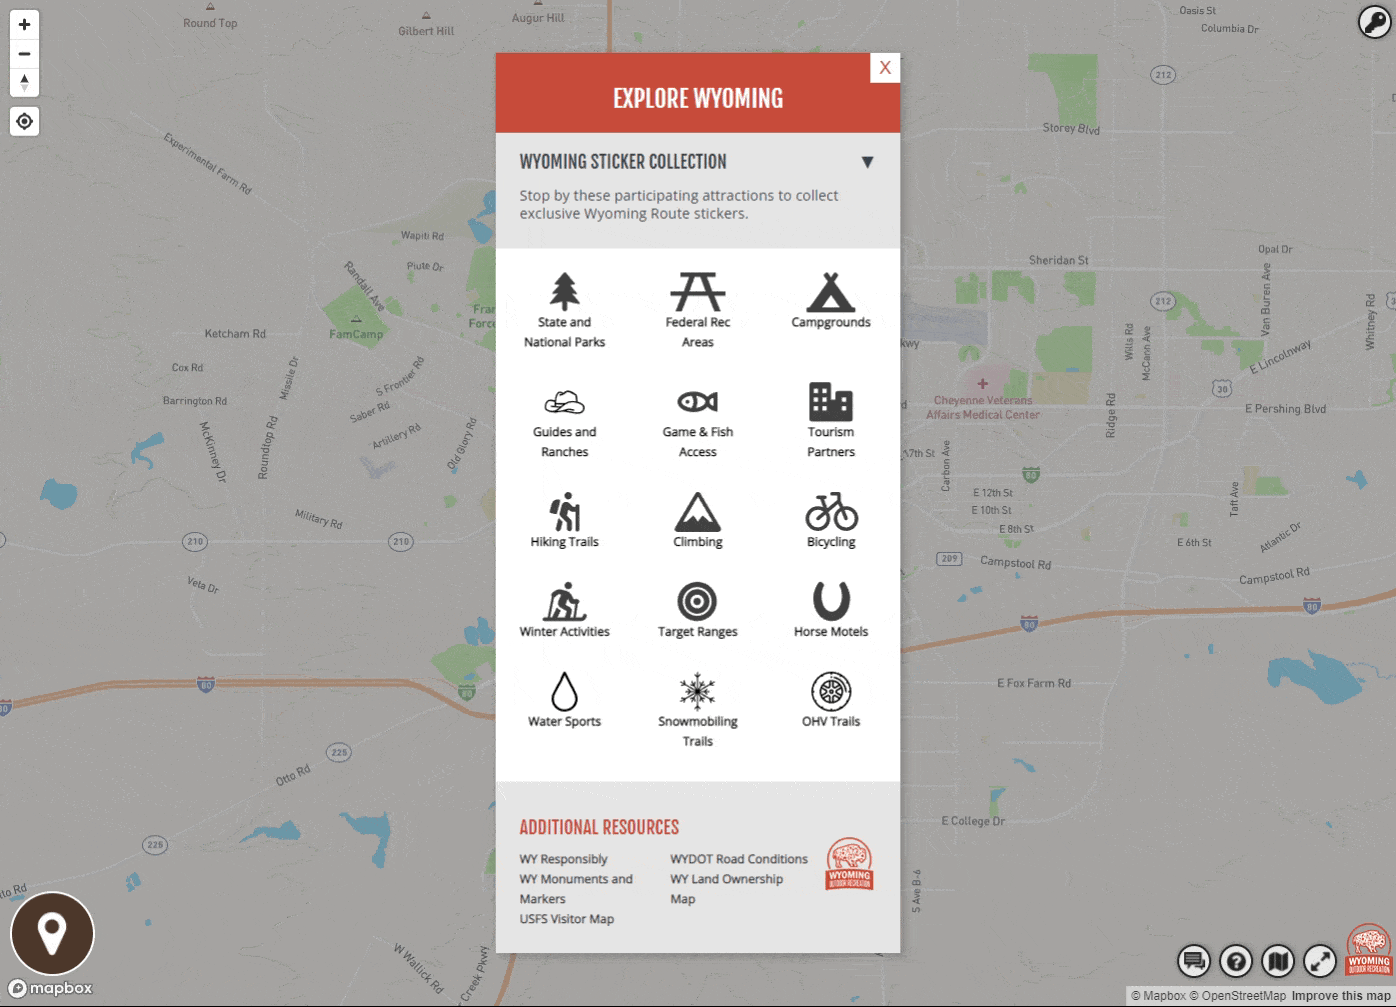 find businesses and select places you would like to go on this interactive map of Wyoming. 